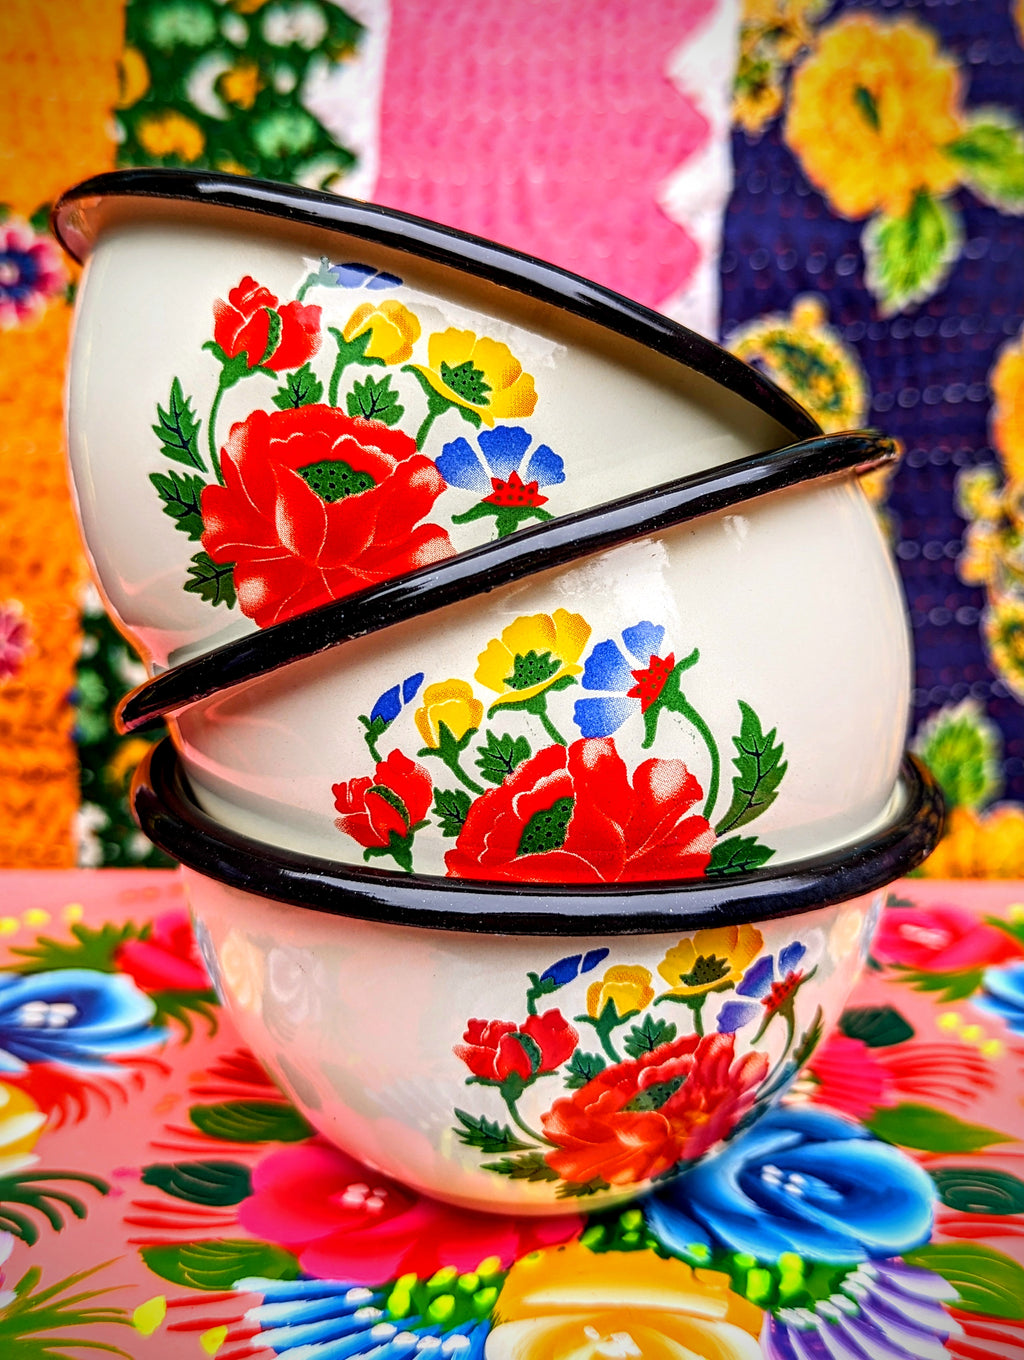 Glorious traditional flower designs on these heavy enamelled bowls made in Ukraine.....pretty as well as ridiculously practical!
Size is just right for morning yoghurt or evening ice cream!!
Porcelain enamelled steel
11cm diameter 6cm high